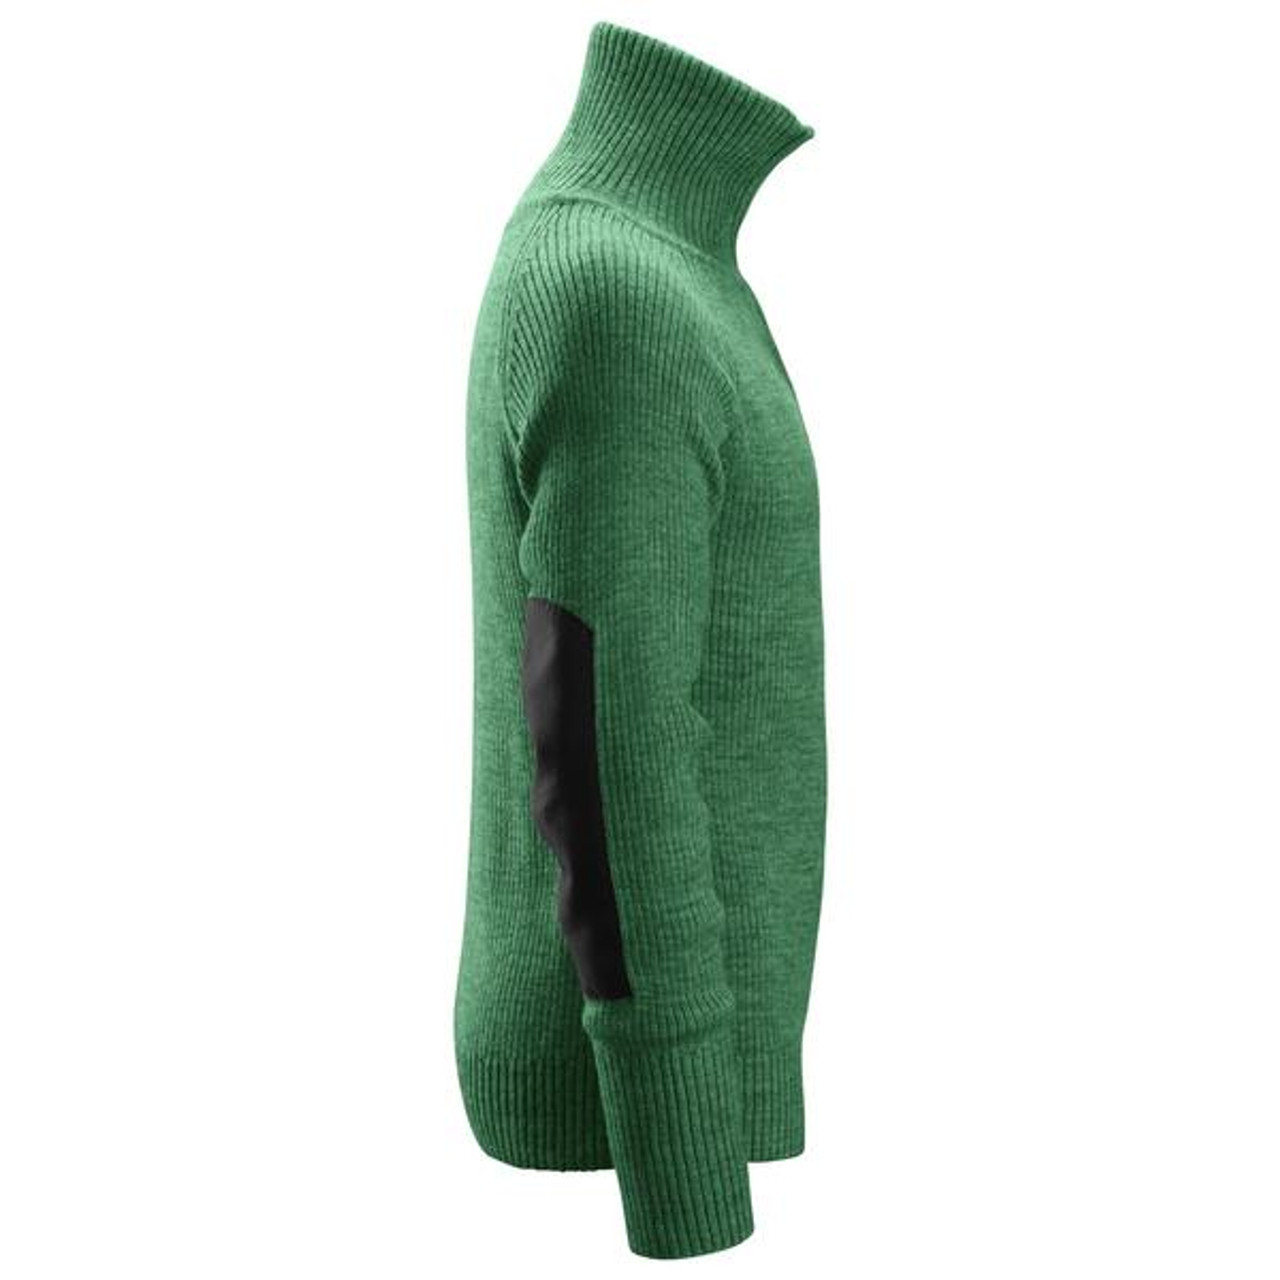 Buy online in Australia and New Zealand a  Green Pullover  for Electricians that are comfortable and durable.